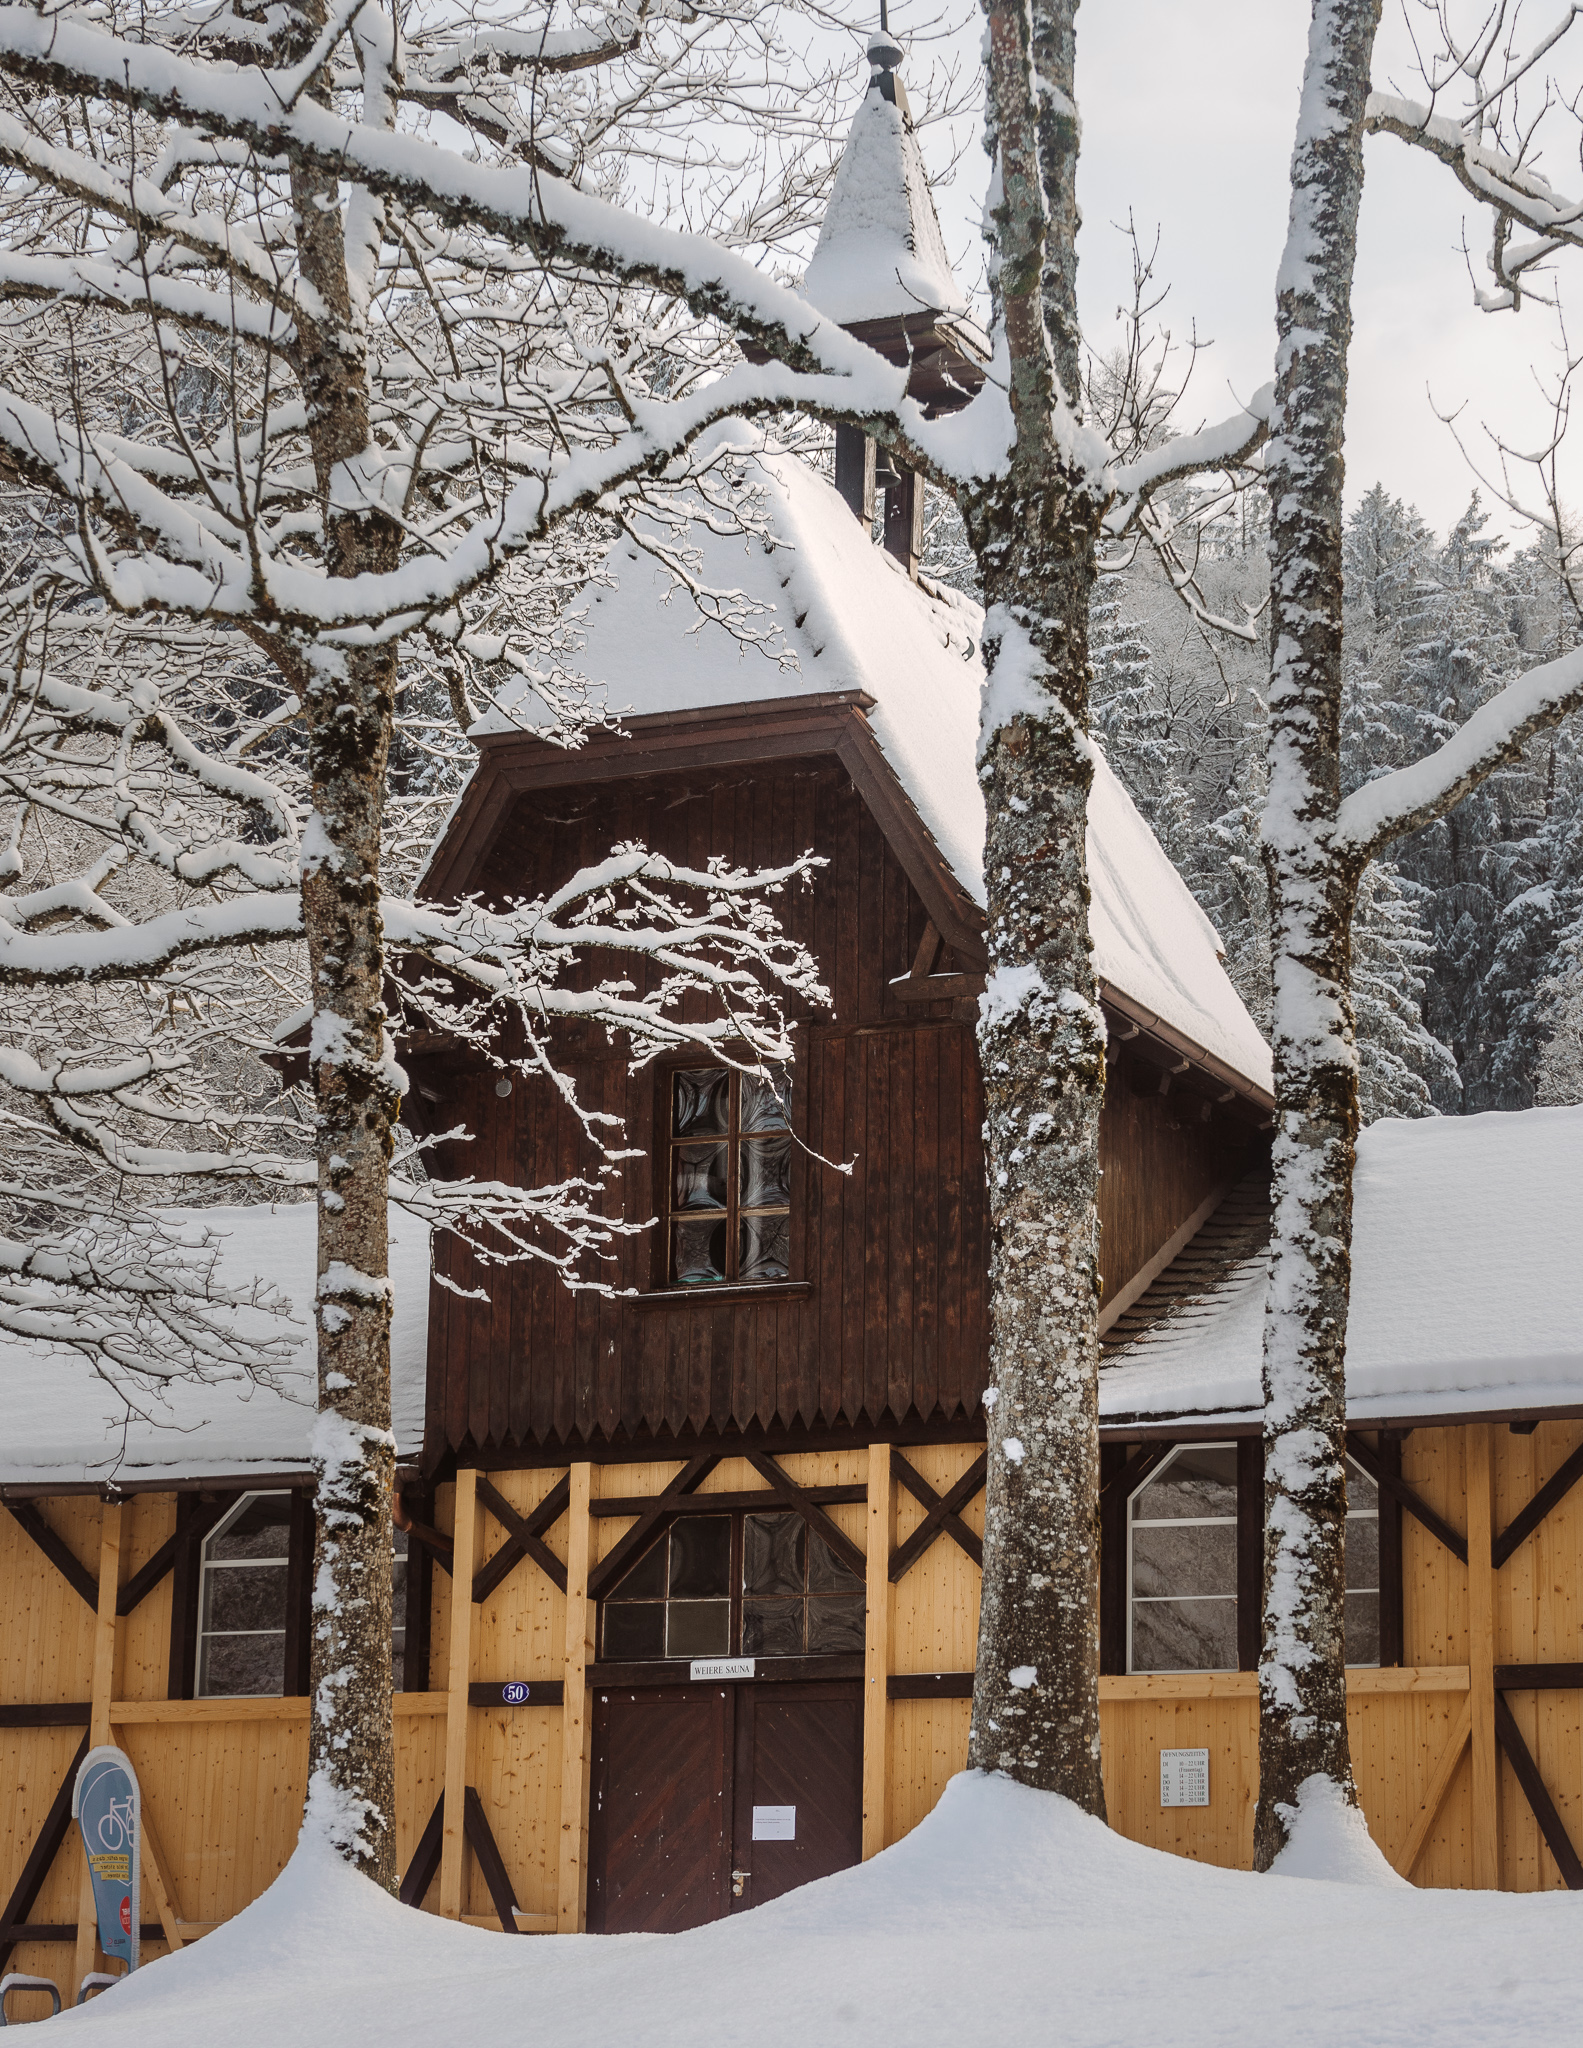 The Weiere Sauna, a wooden structure in the forest with snow on the roof and surrounding trees.